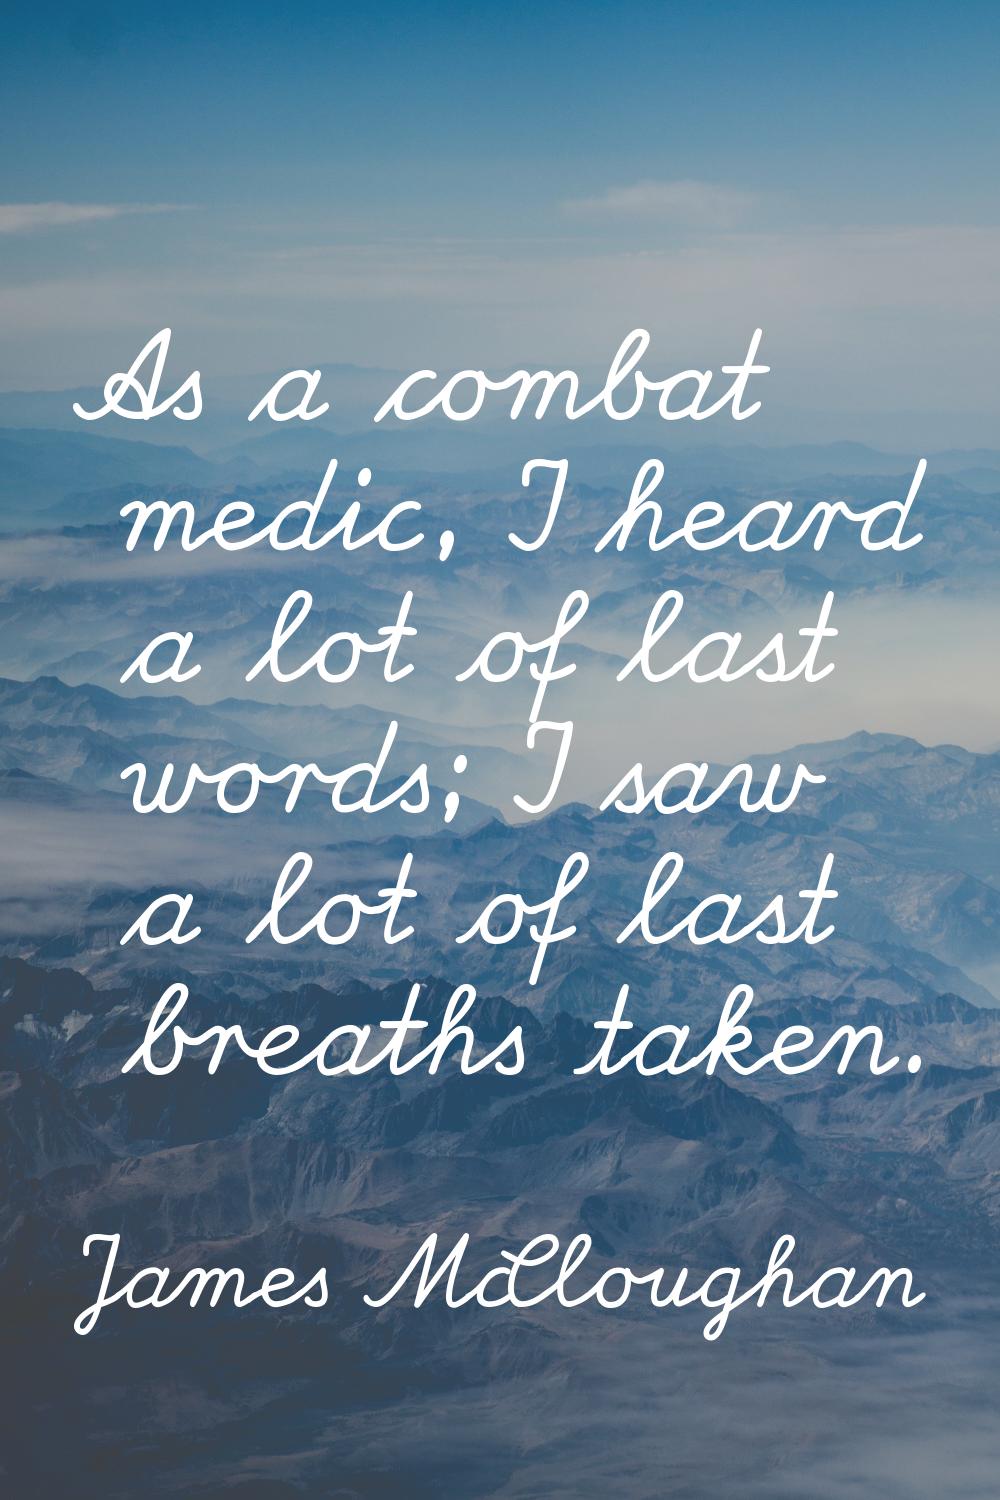 As a combat medic, I heard a lot of last words; I saw a lot of last breaths taken.